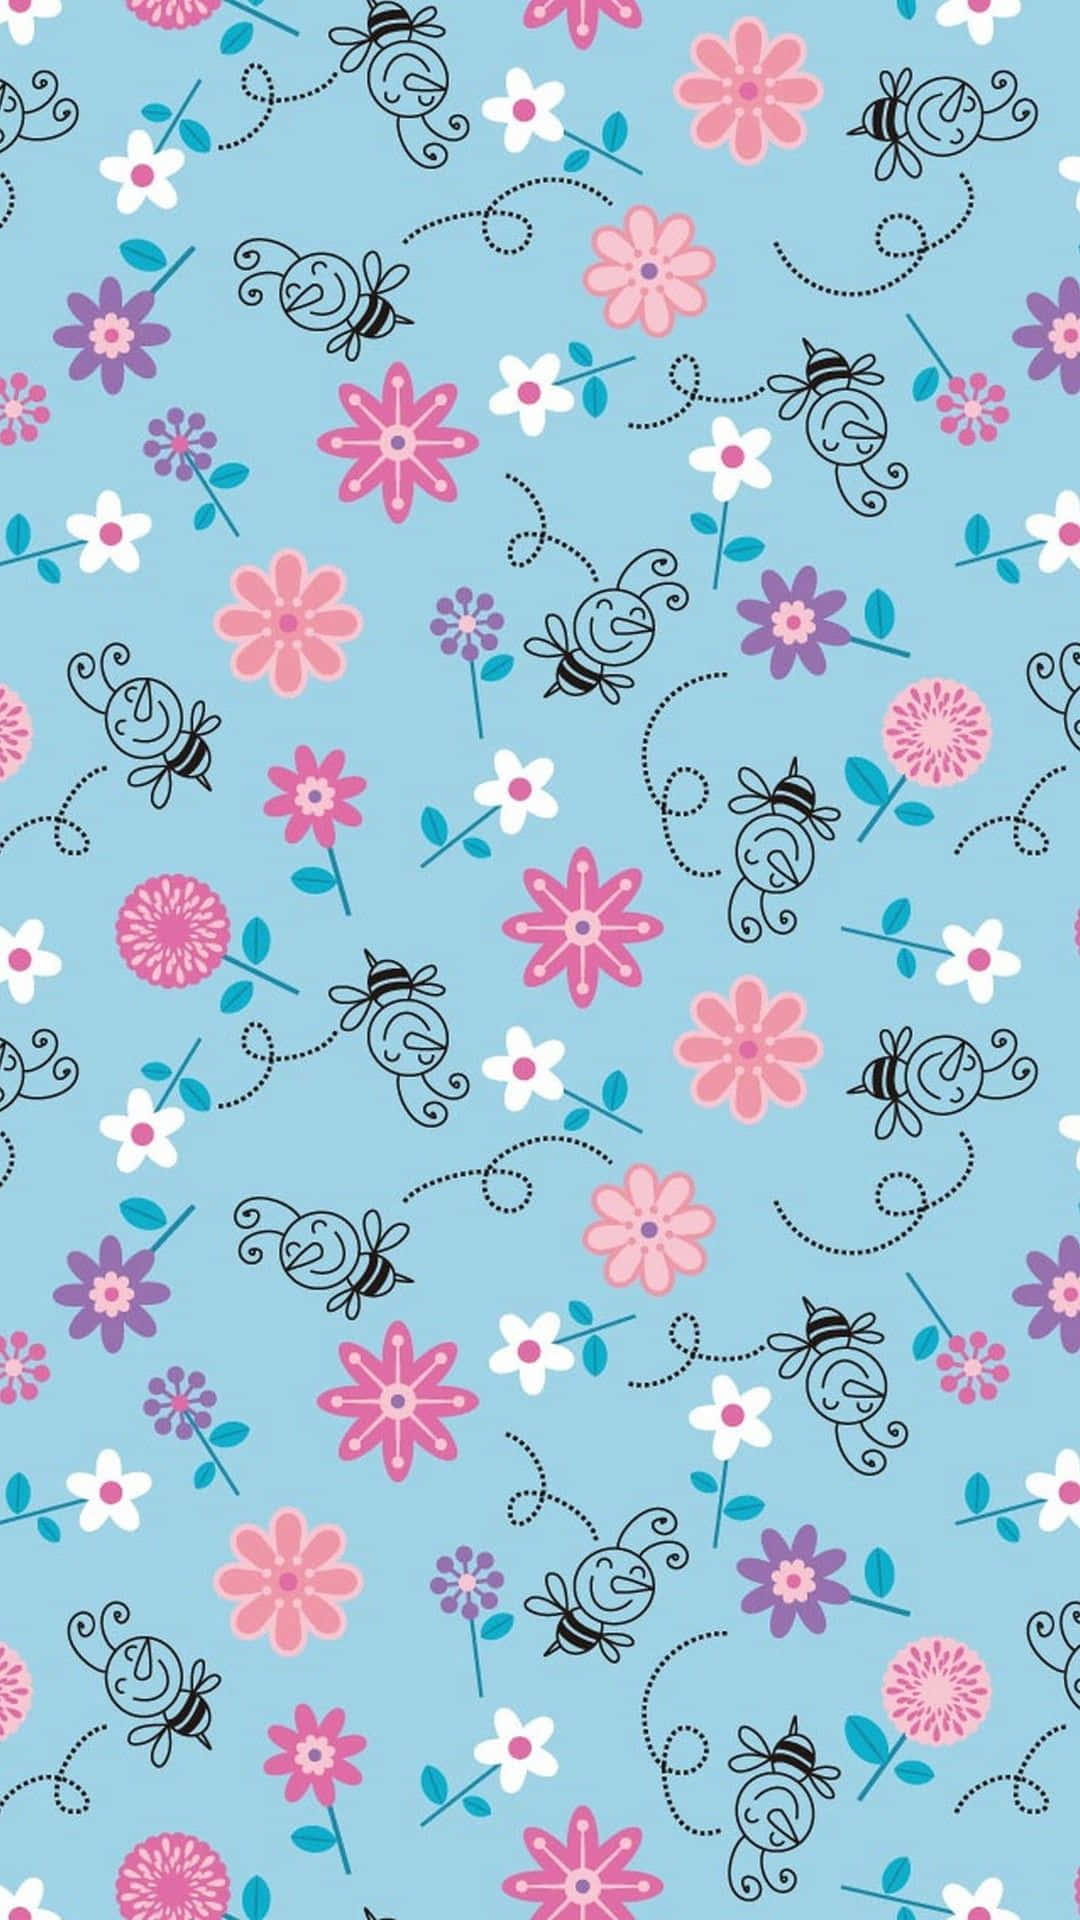 A Blue And Pink Floral Pattern With Butterflies And Flowers Wallpaper